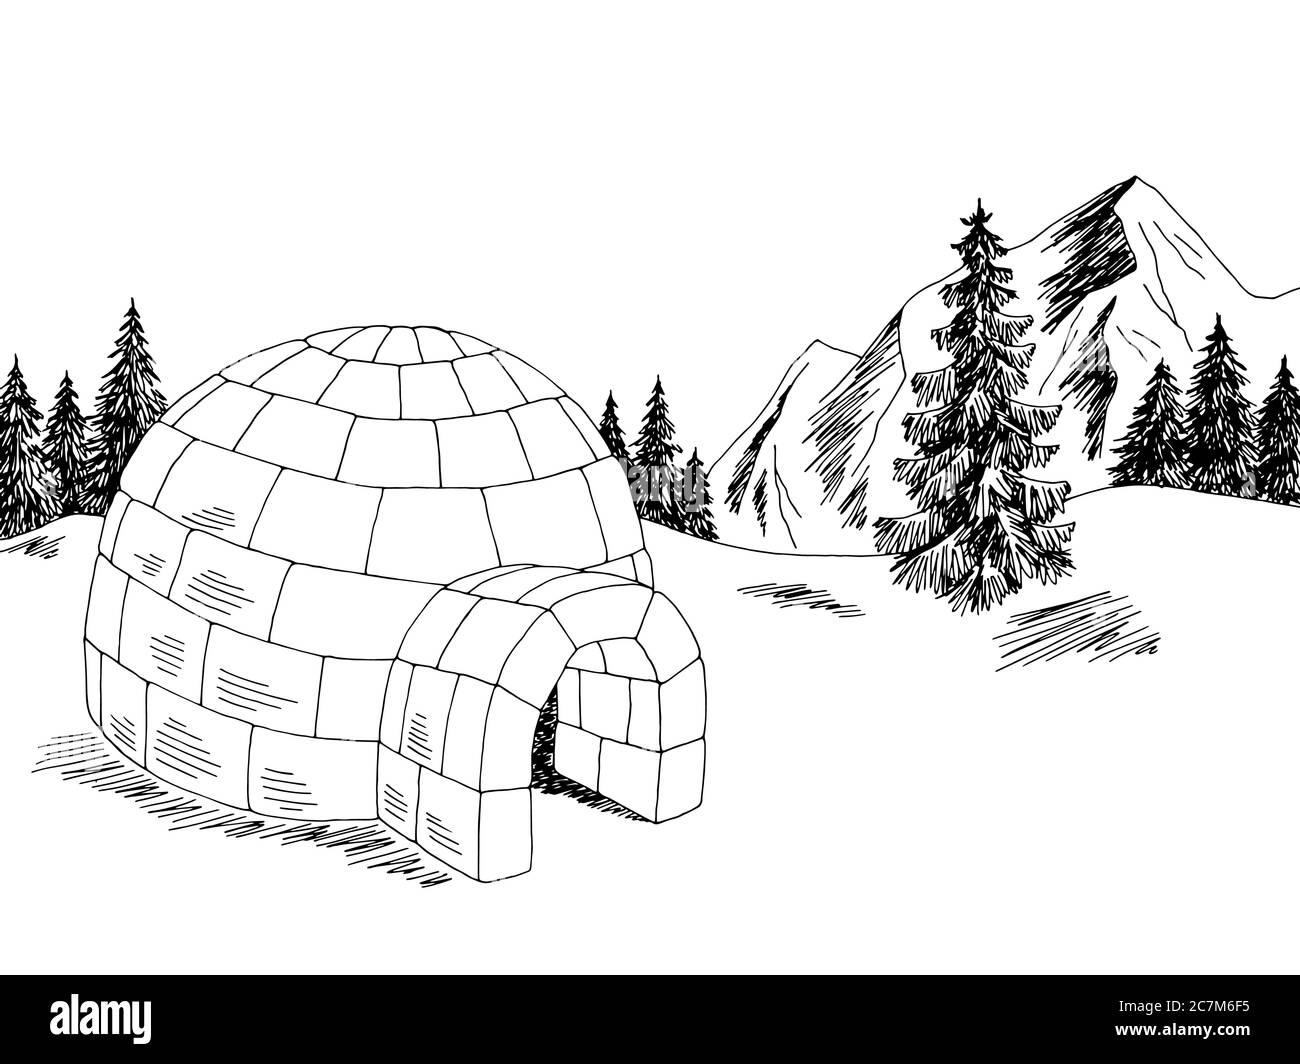 Igloo Cartoon Outline / Cartoon showing an igloo in the middle of ...